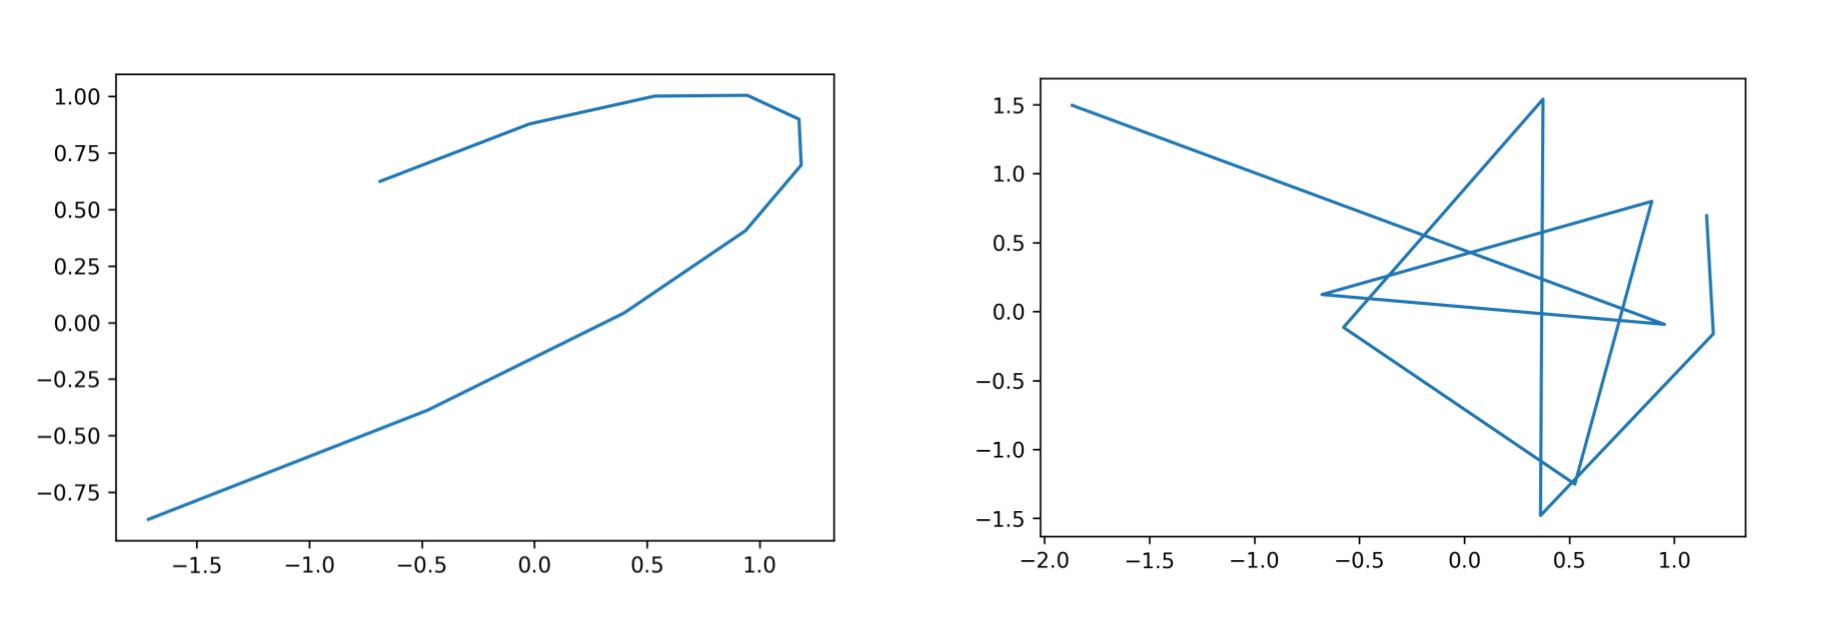 Two plots showing a spline in R2, the left one makes one curve, the right one makes many curves and crosses itself many times.